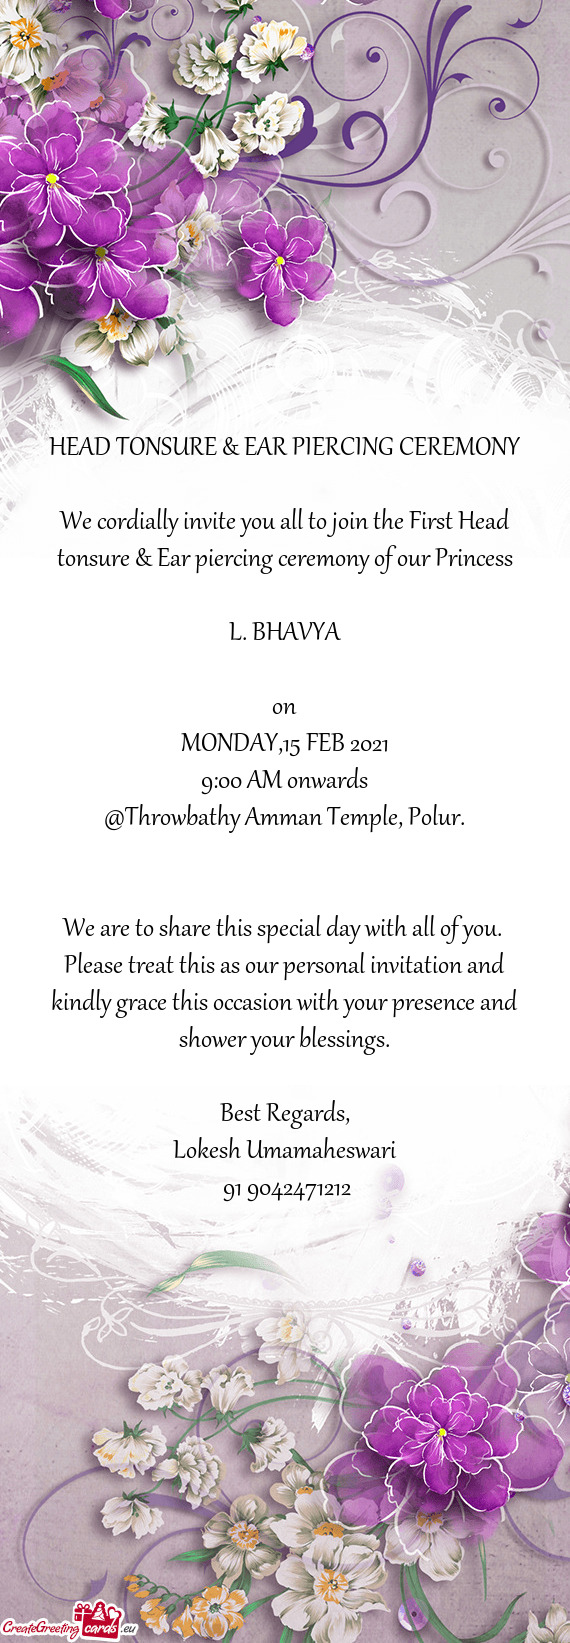 We cordially invite you all to join the First Head tonsure & Ear piercing ceremony of our Princess